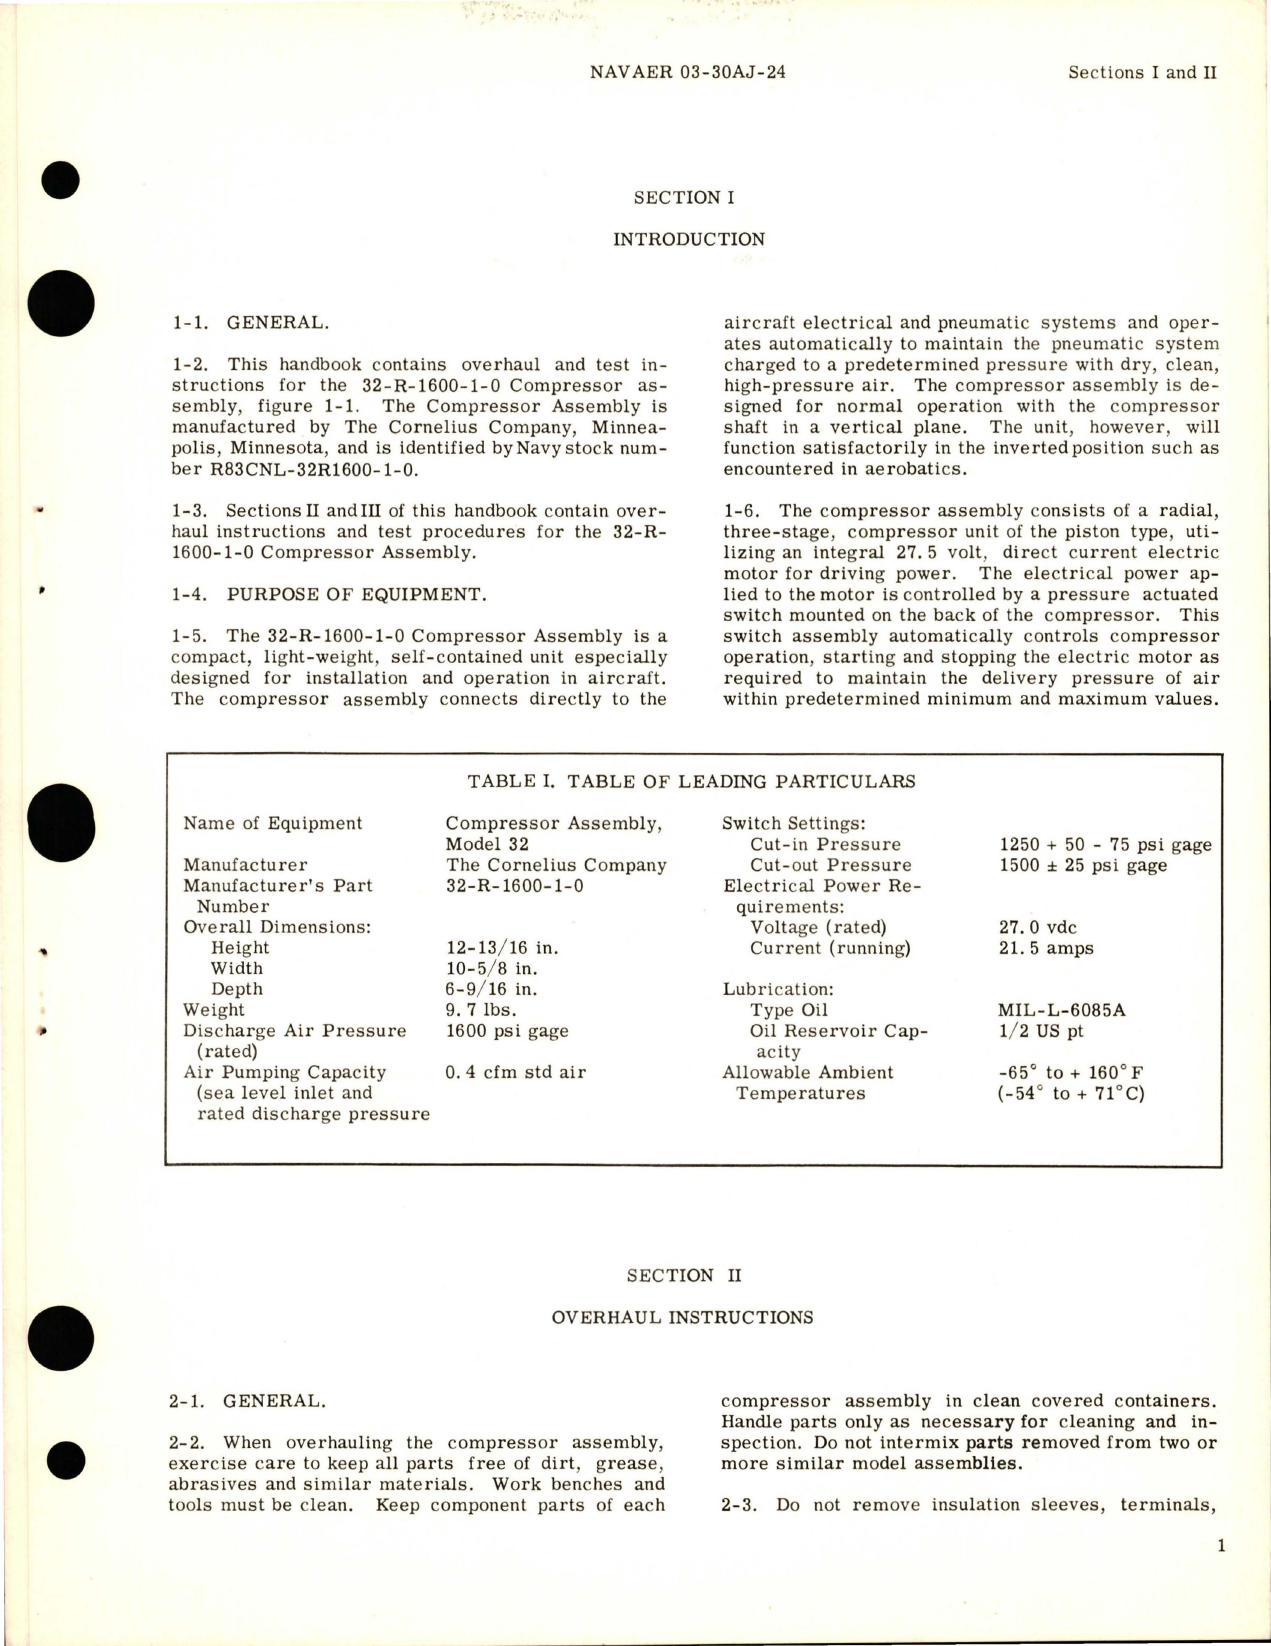 Sample page 5 from AirCorps Library document: Overhaul Instructions for Compressor Assembly - Model 32-R-1600-1-0